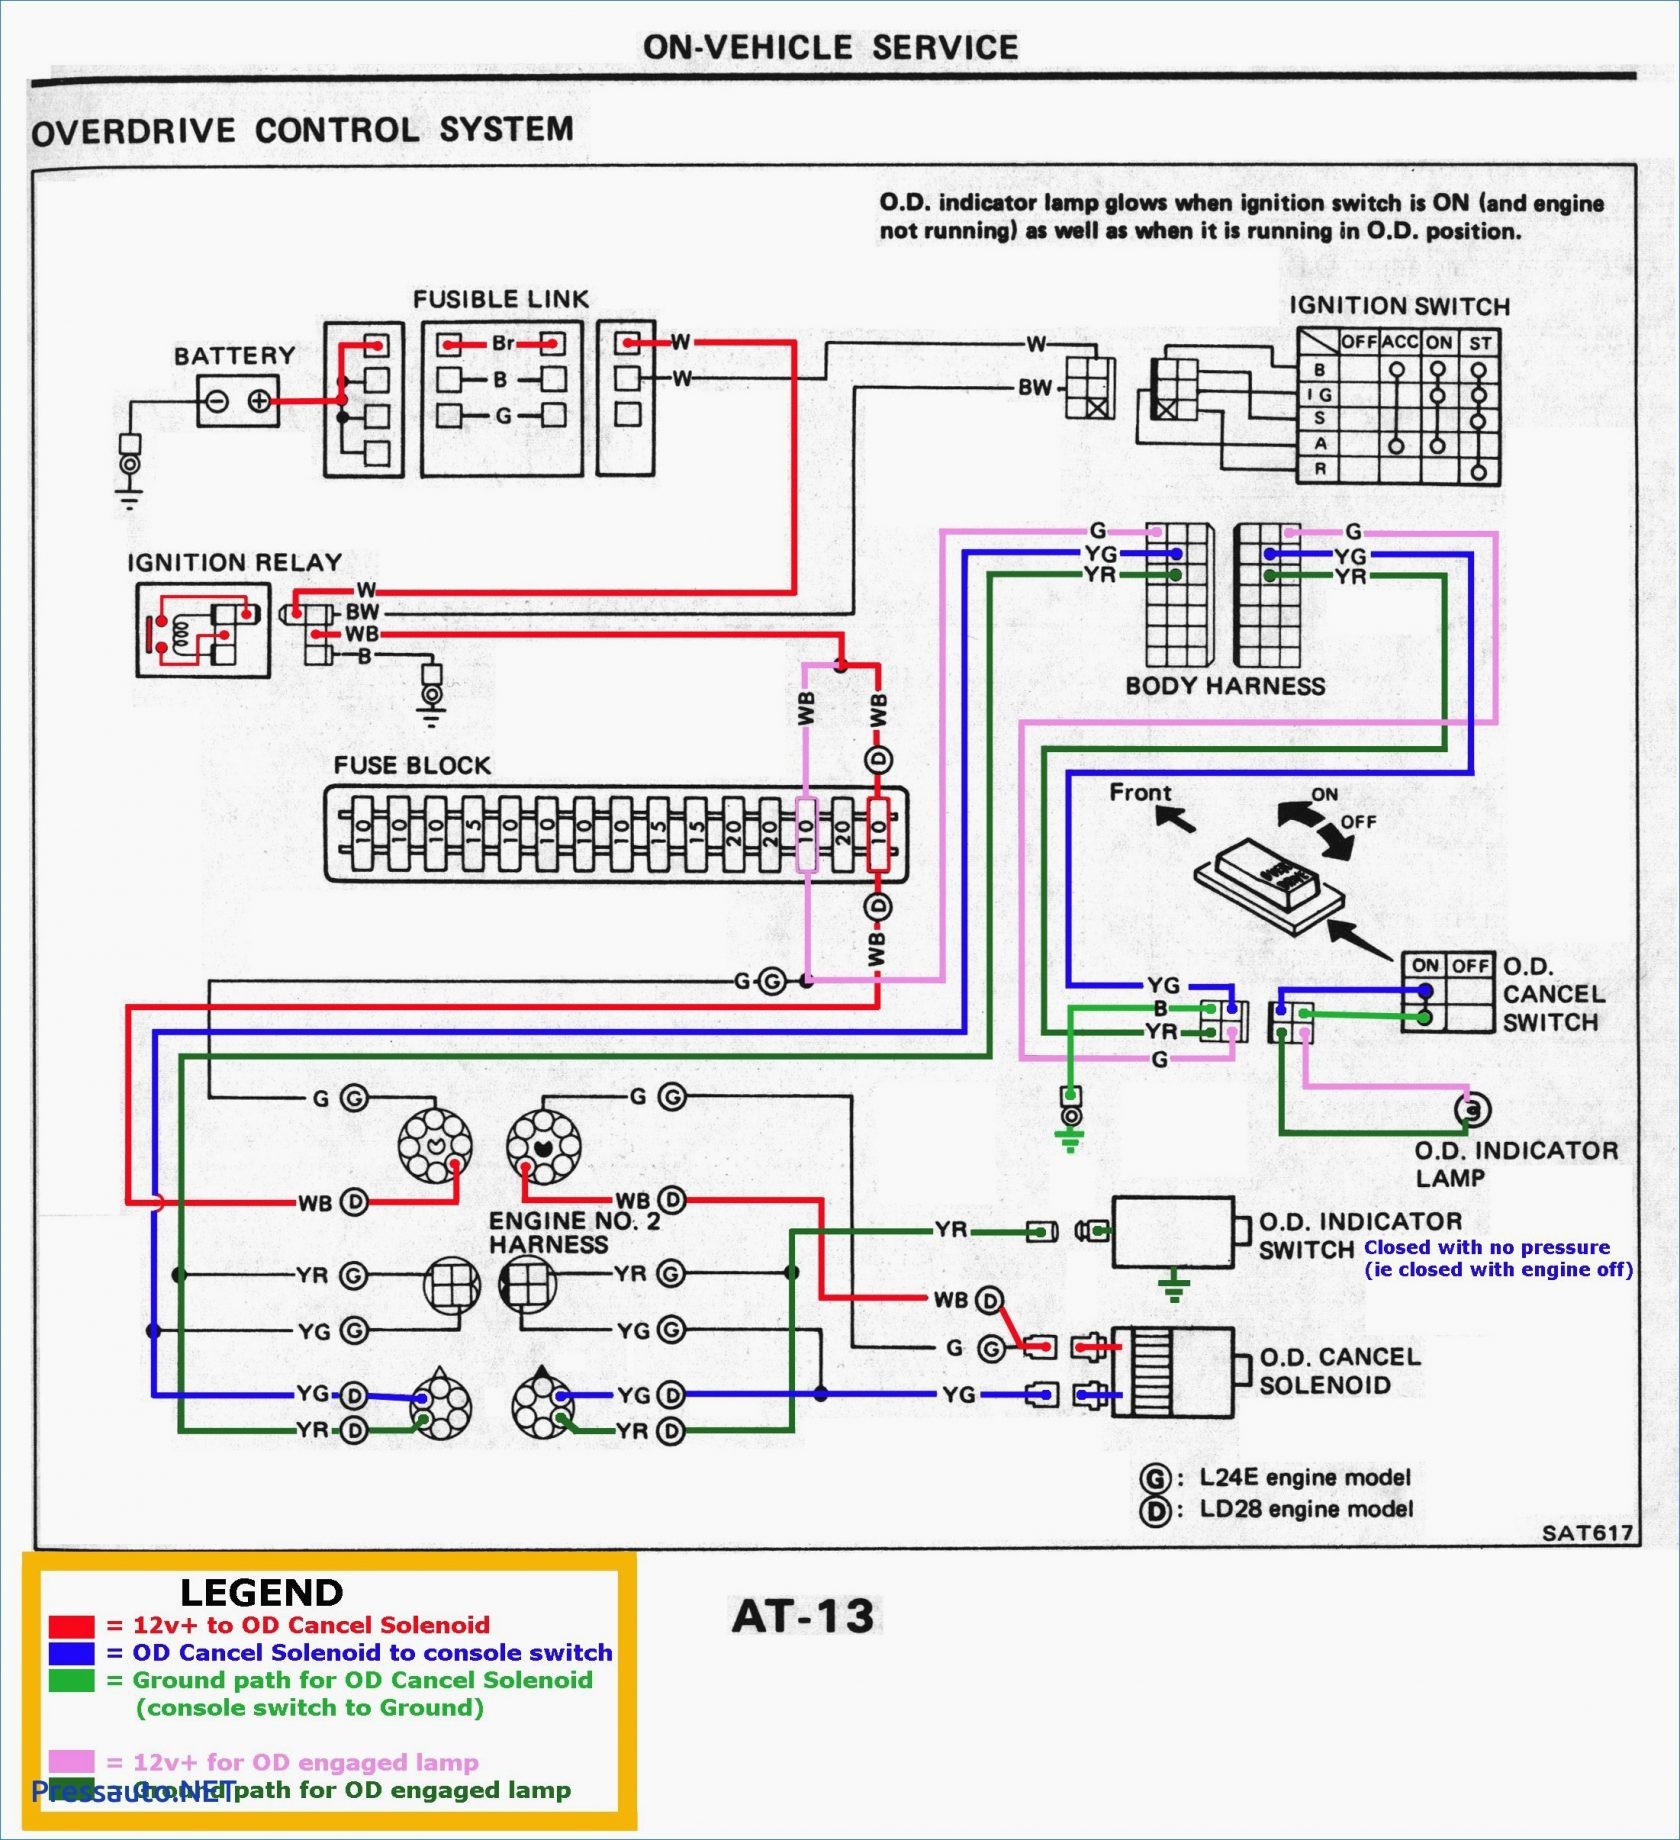 Engine Test Stand Wiring Diagram Awesome Fuel Pump Wiring Harness Diagram Diagram Of Engine Test Stand Wiring Diagram